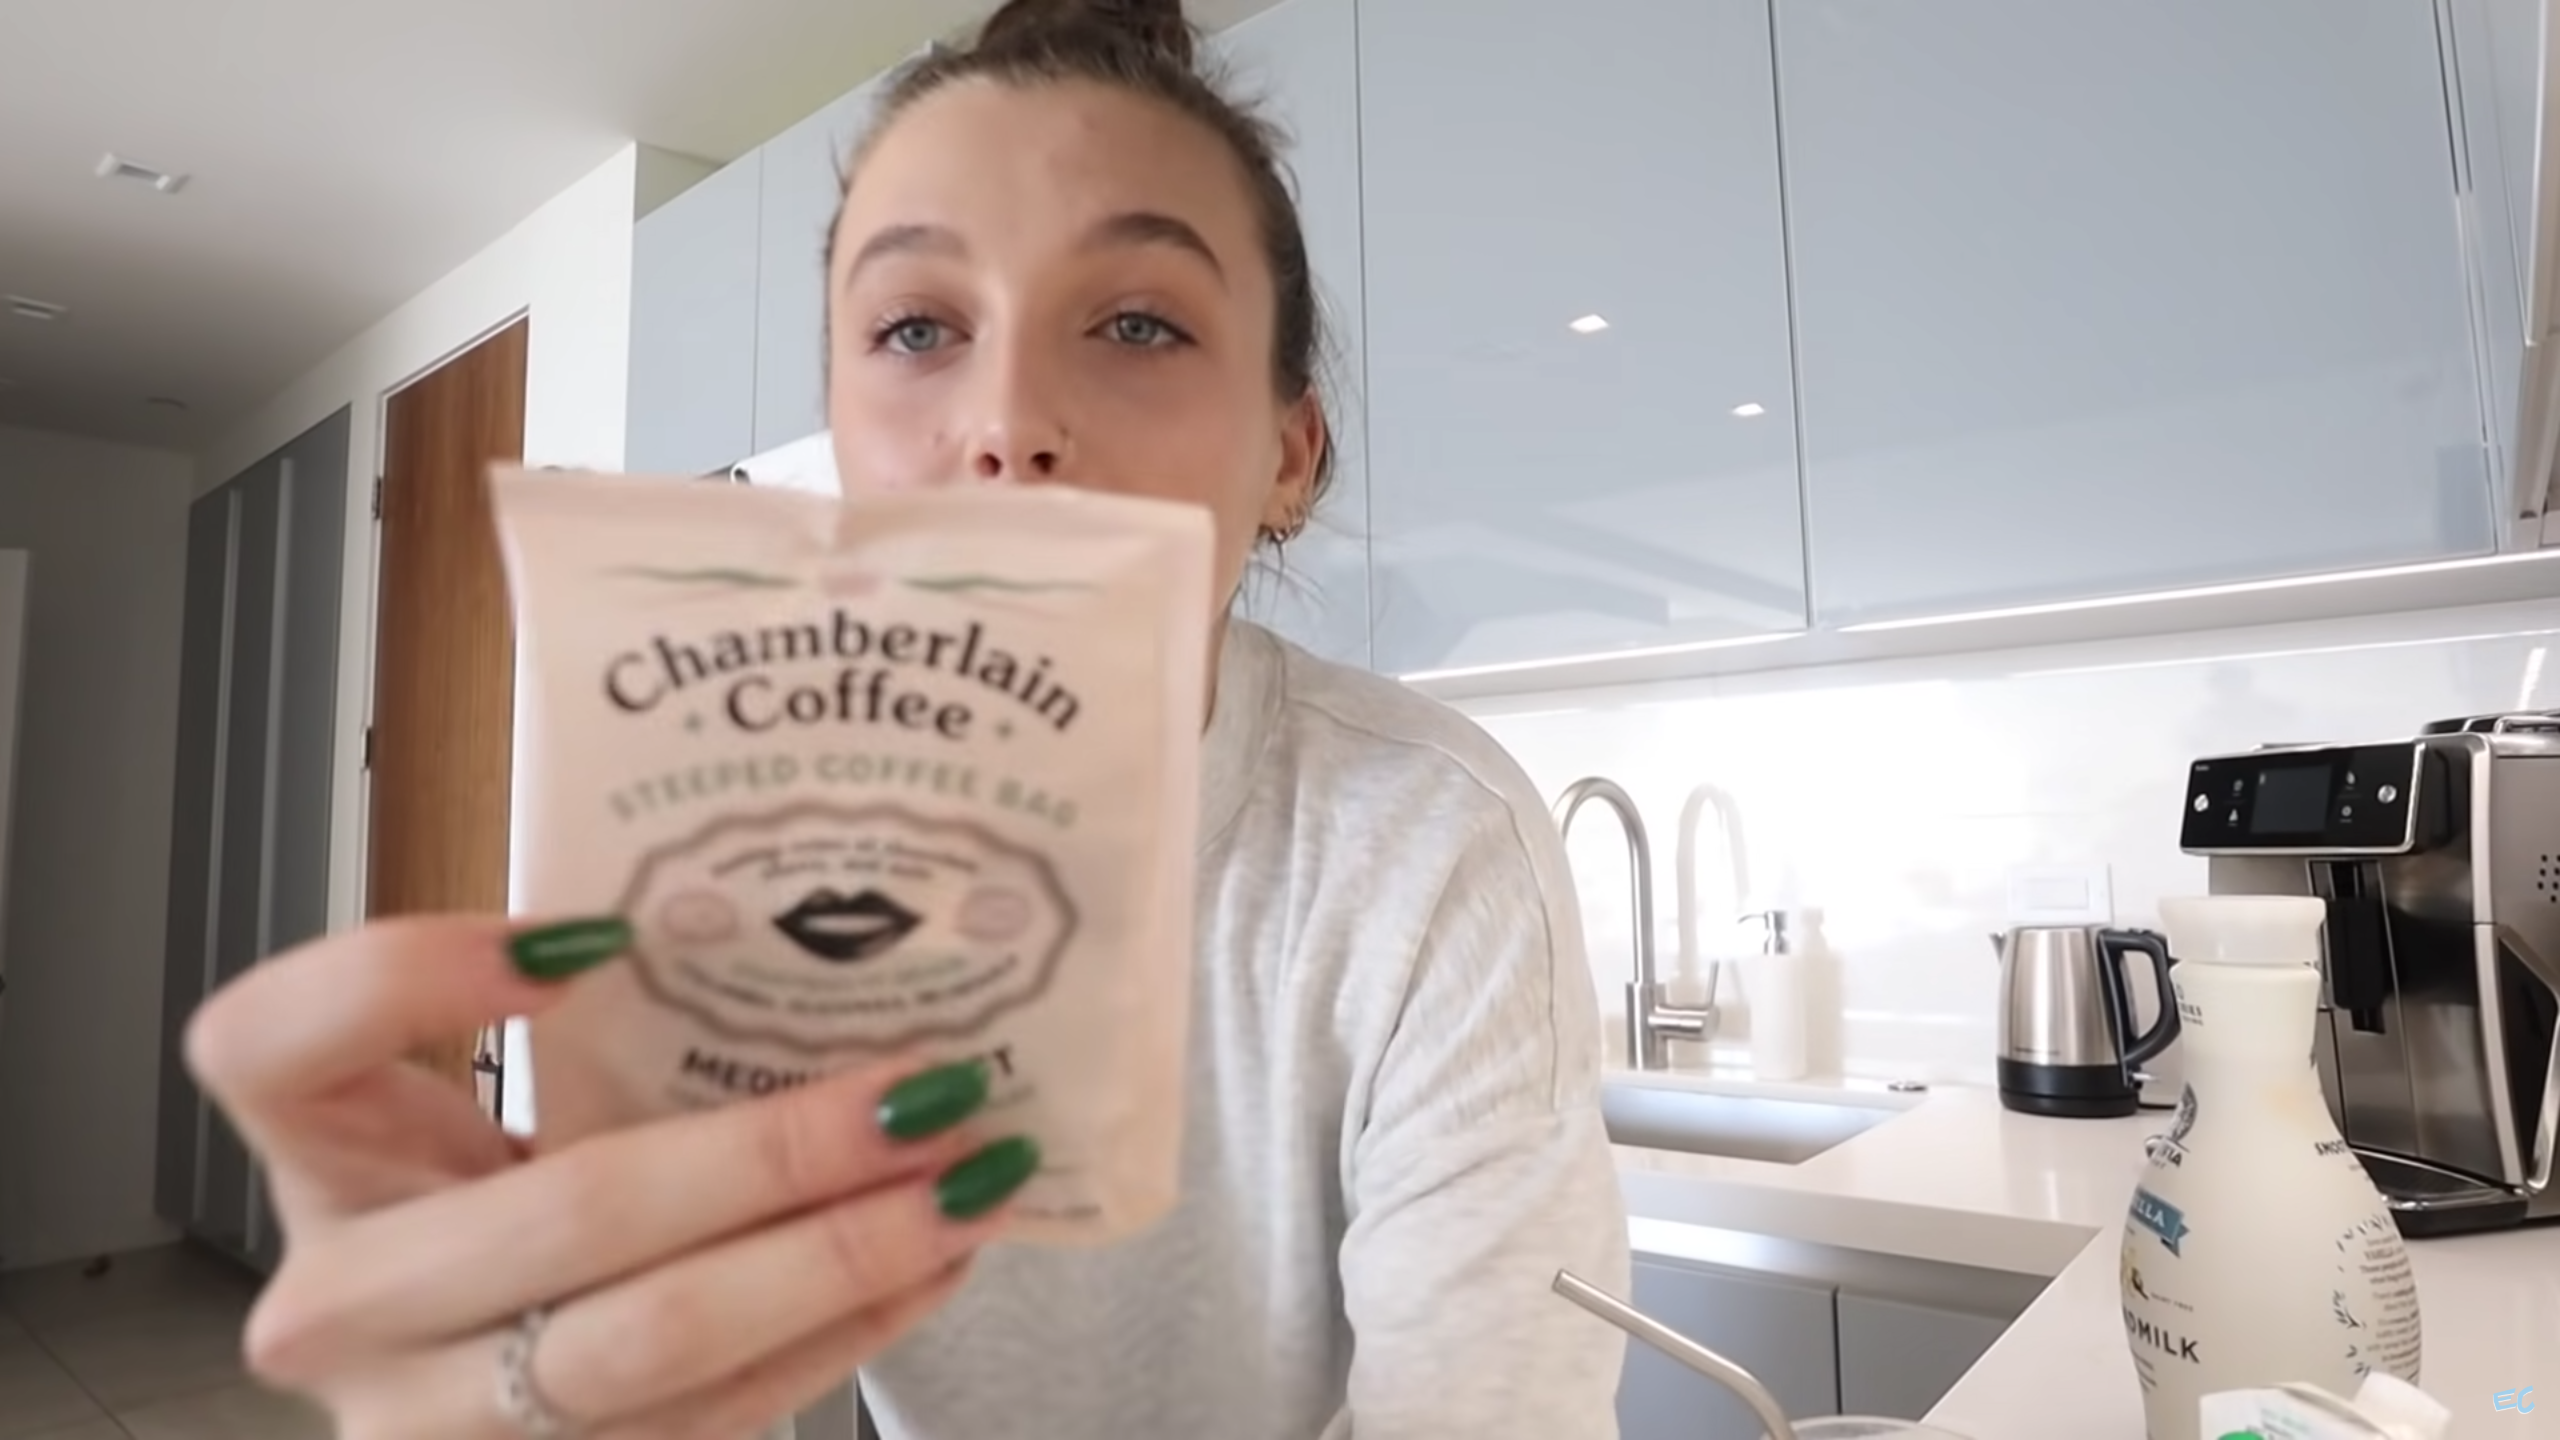 We Tried Emma Chamberlain's Coffee Line and It Wasn't Worth the Work